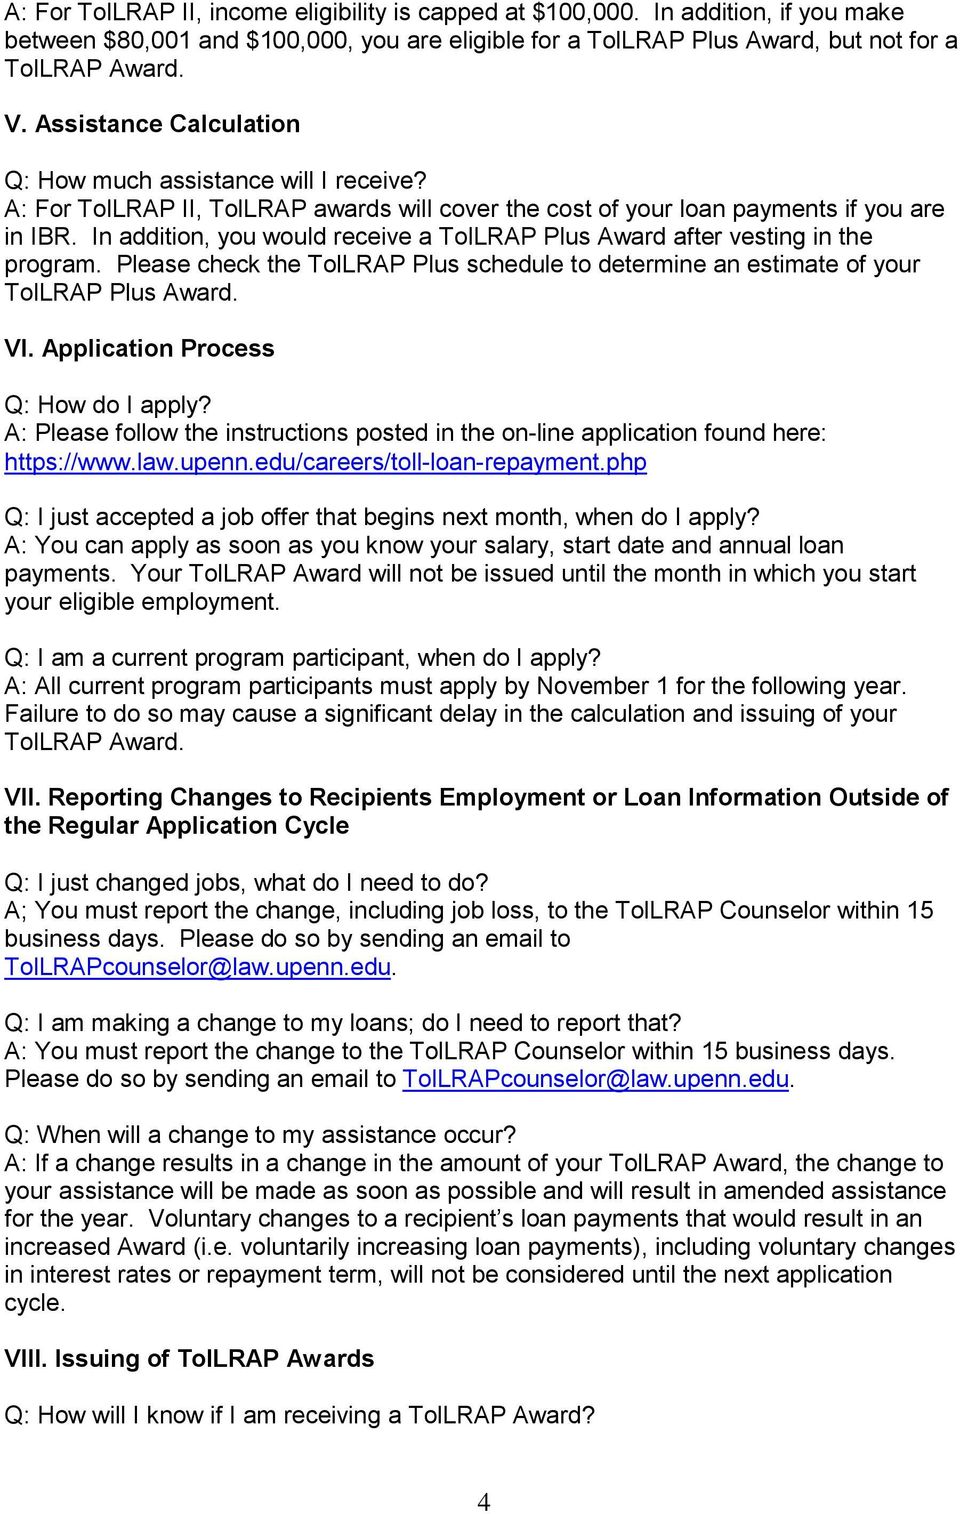 In addition, you would receive a TolLRAP Plus Award after vesting in the program. Please check the TolLRAP Plus schedule to determine an estimate of your TolLRAP Plus Award. VI.